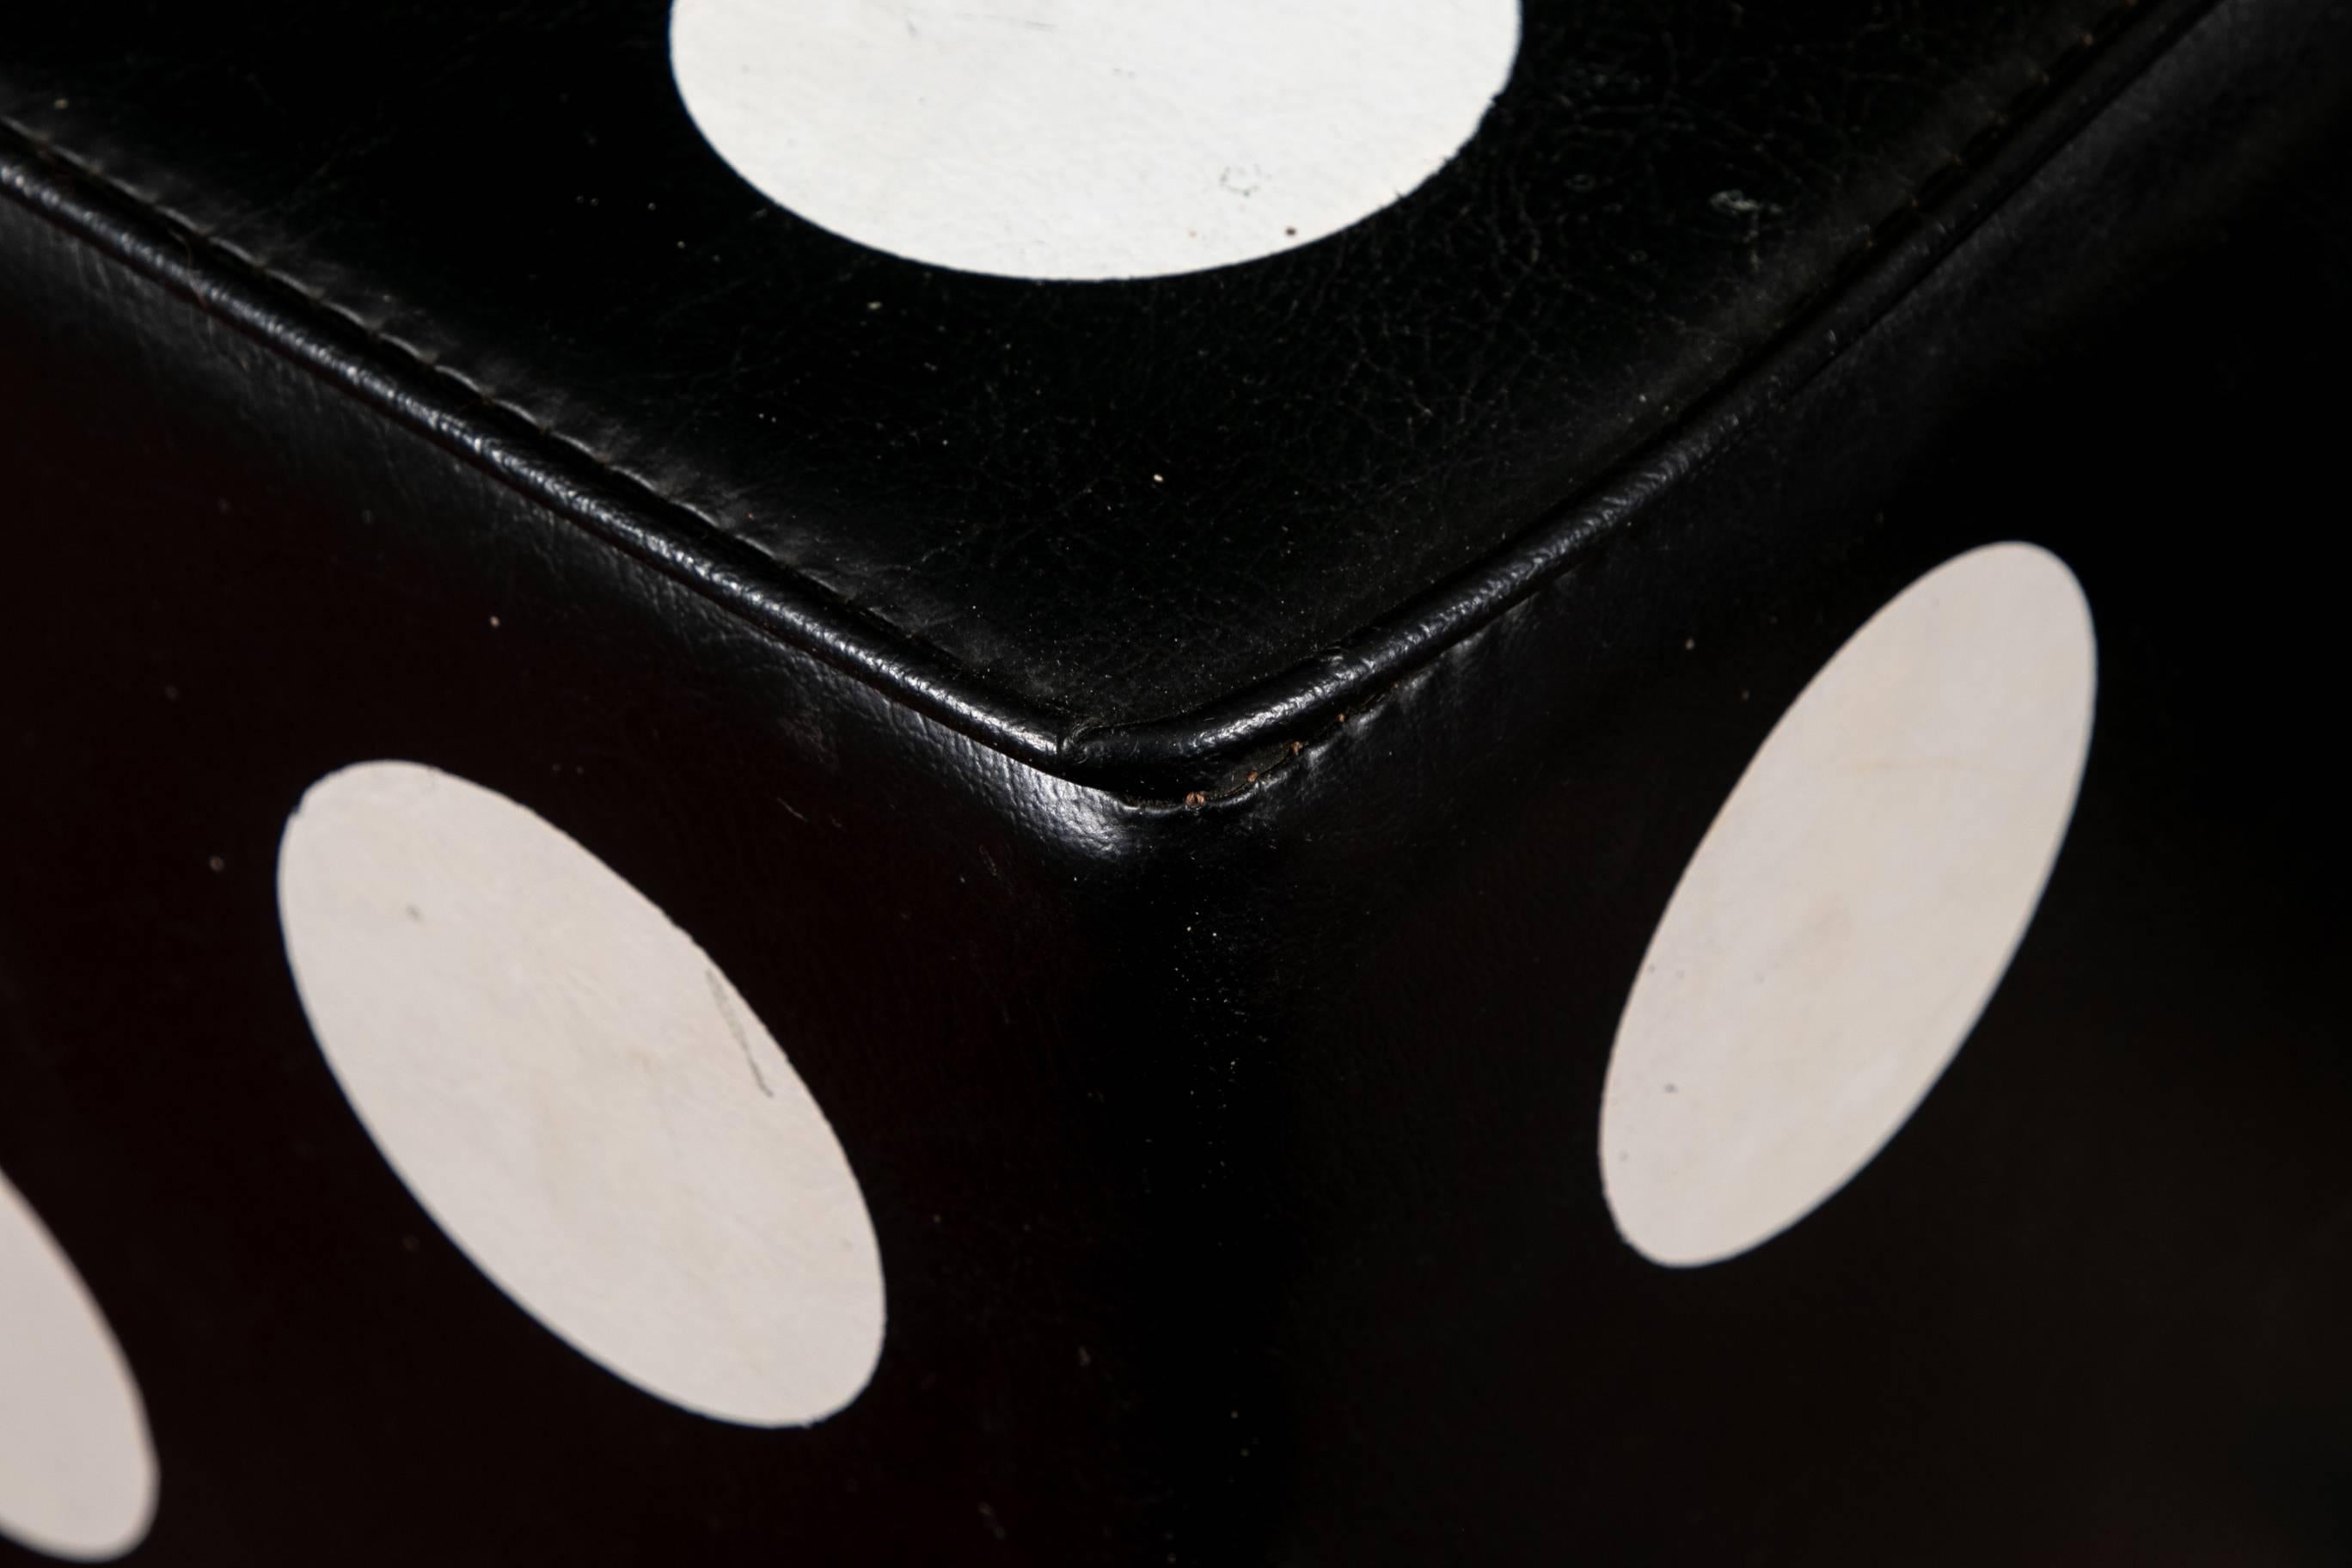 Pair of dice form square stools, leather or leather type vinyl in black with white dots, felt bottoms.

Condition: Expected wear and signs of use including some areas of light scuffing and a few minor tears.
 